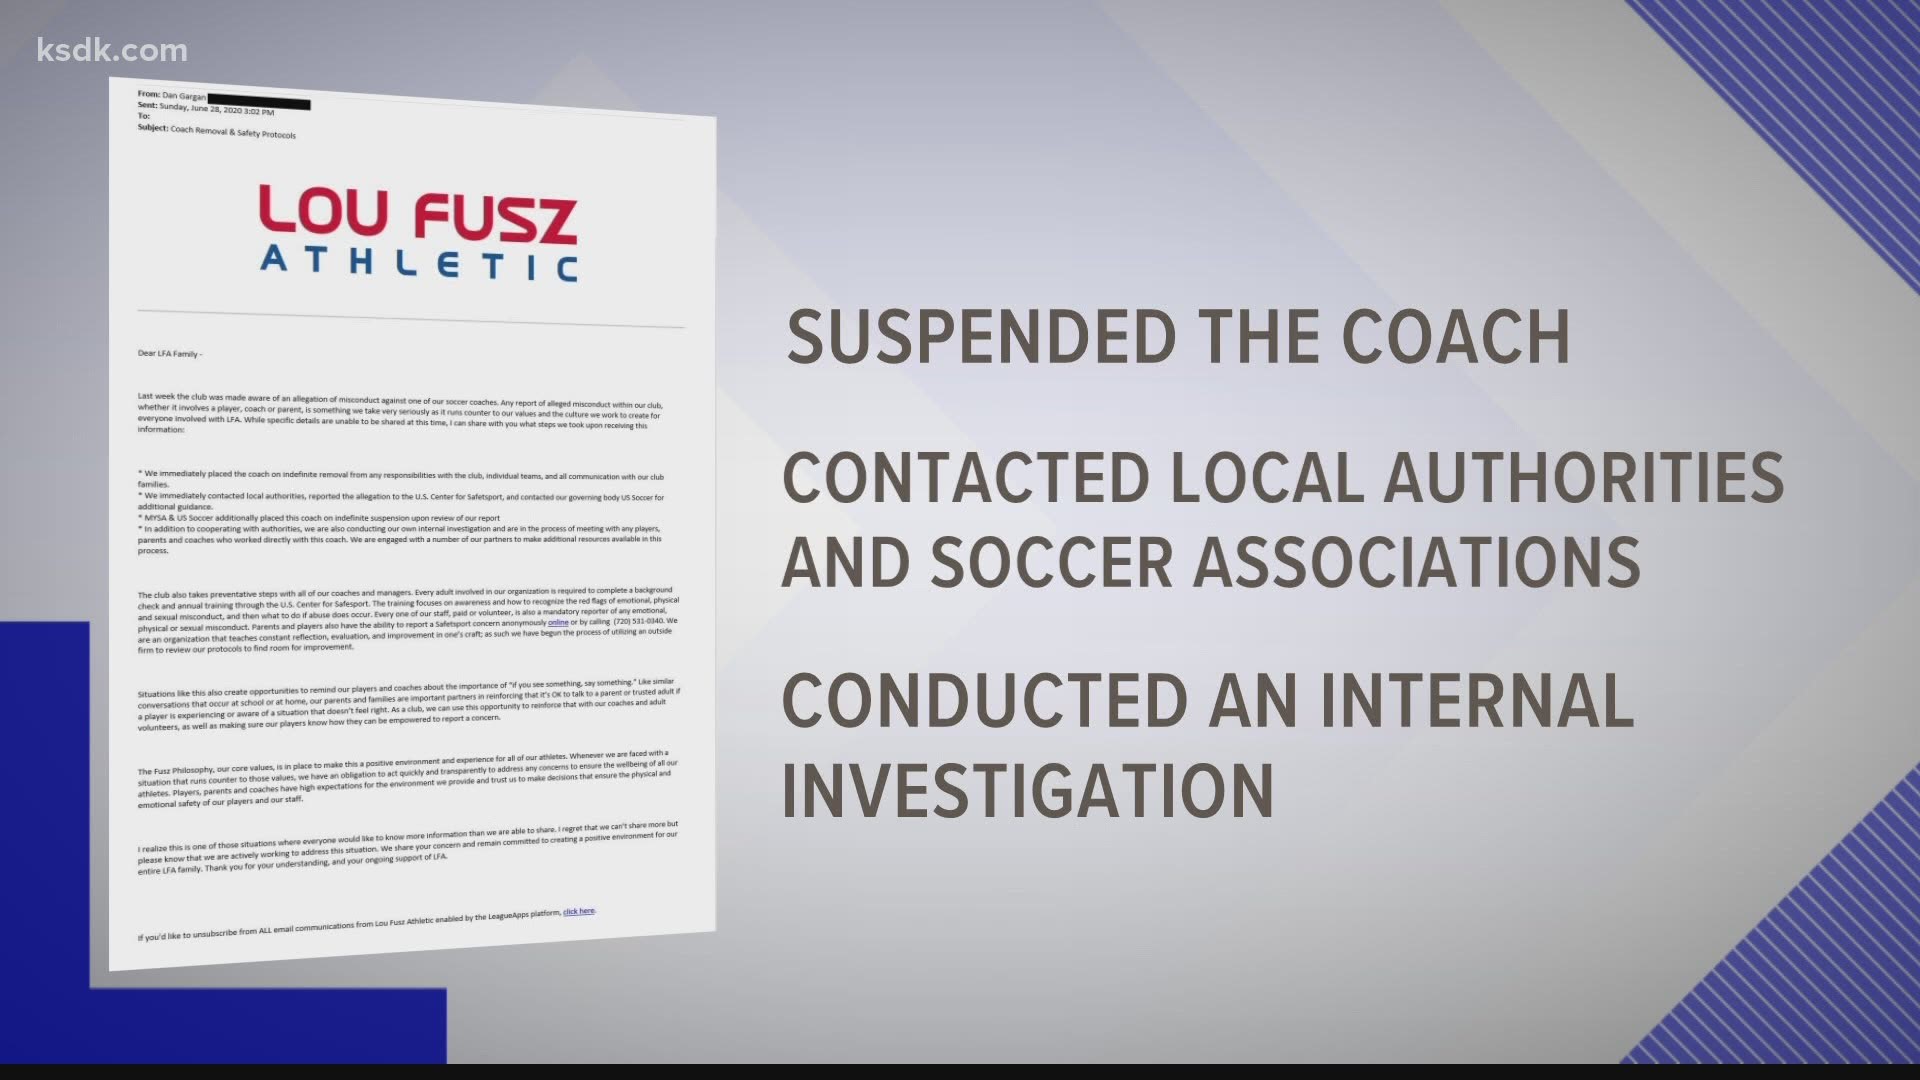 St. Louis: Player accuses Lou Fusz soccer coach of sexual abuse | www.bagssaleusa.com